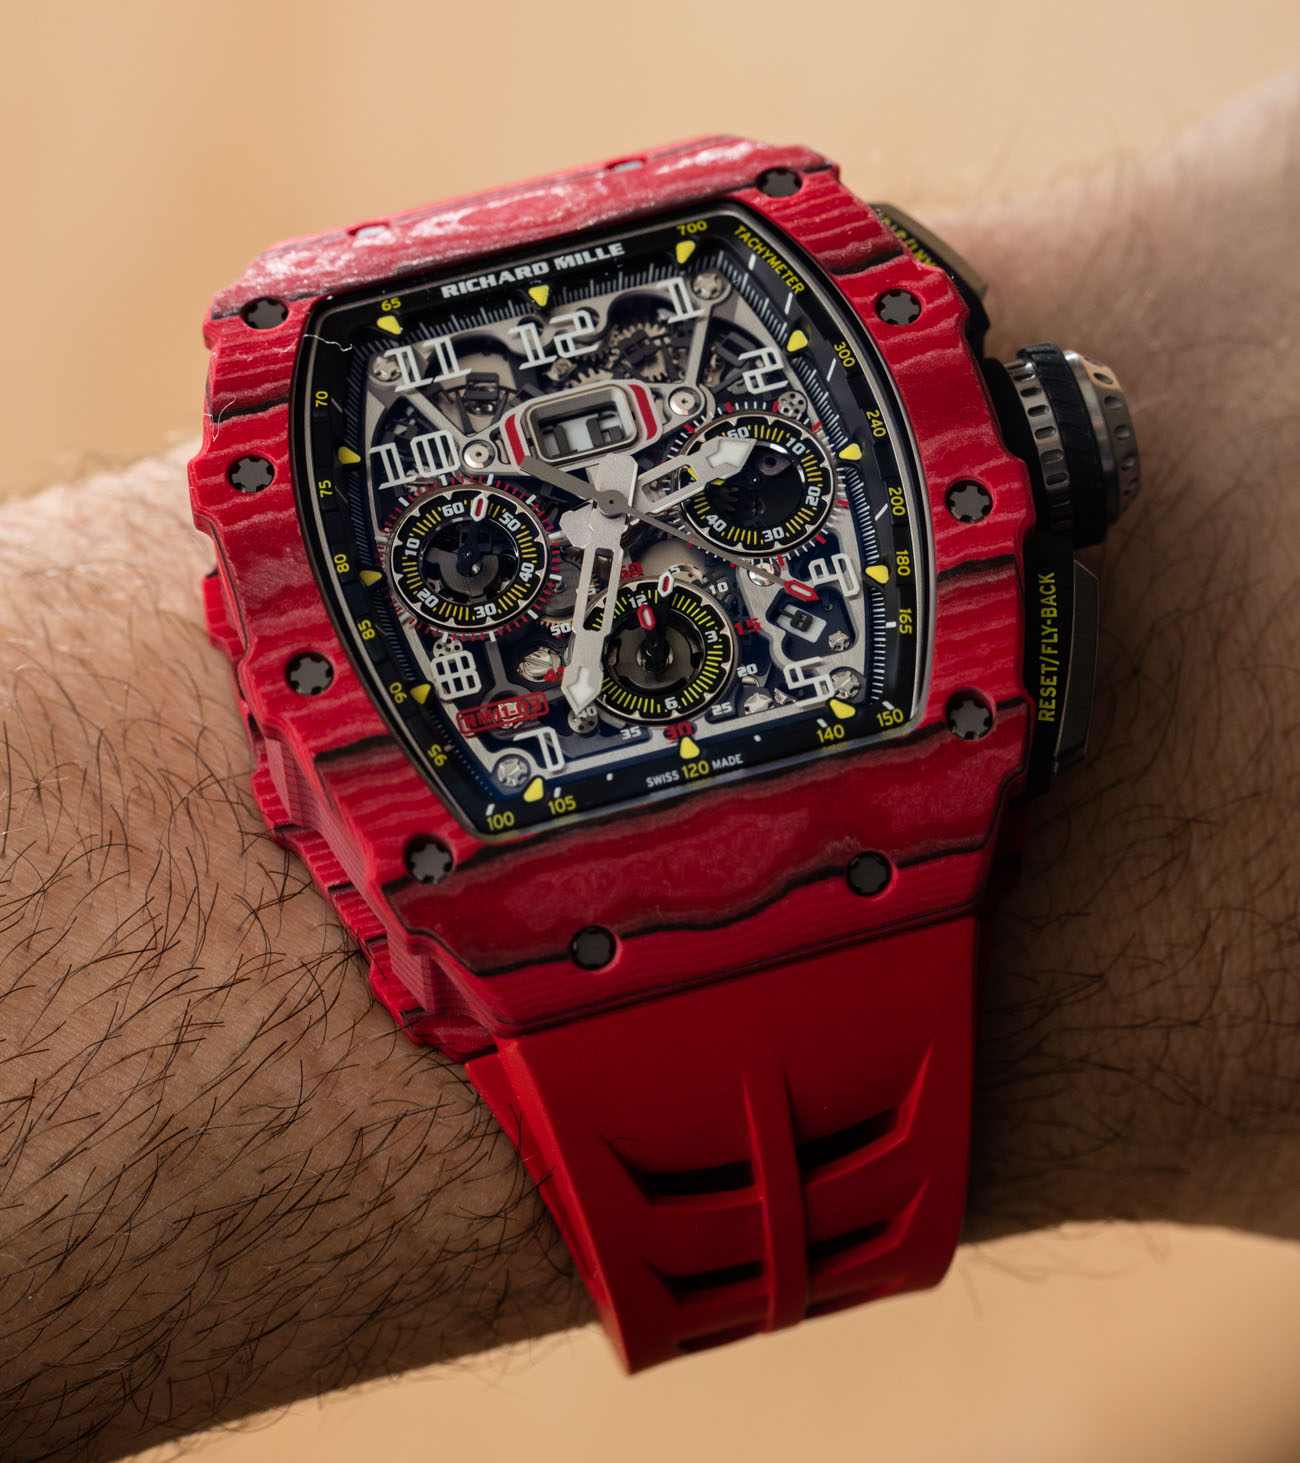 Richard Mille RM 11-03 Automatic Flyback Chronograph Red Quartz FQ TPT